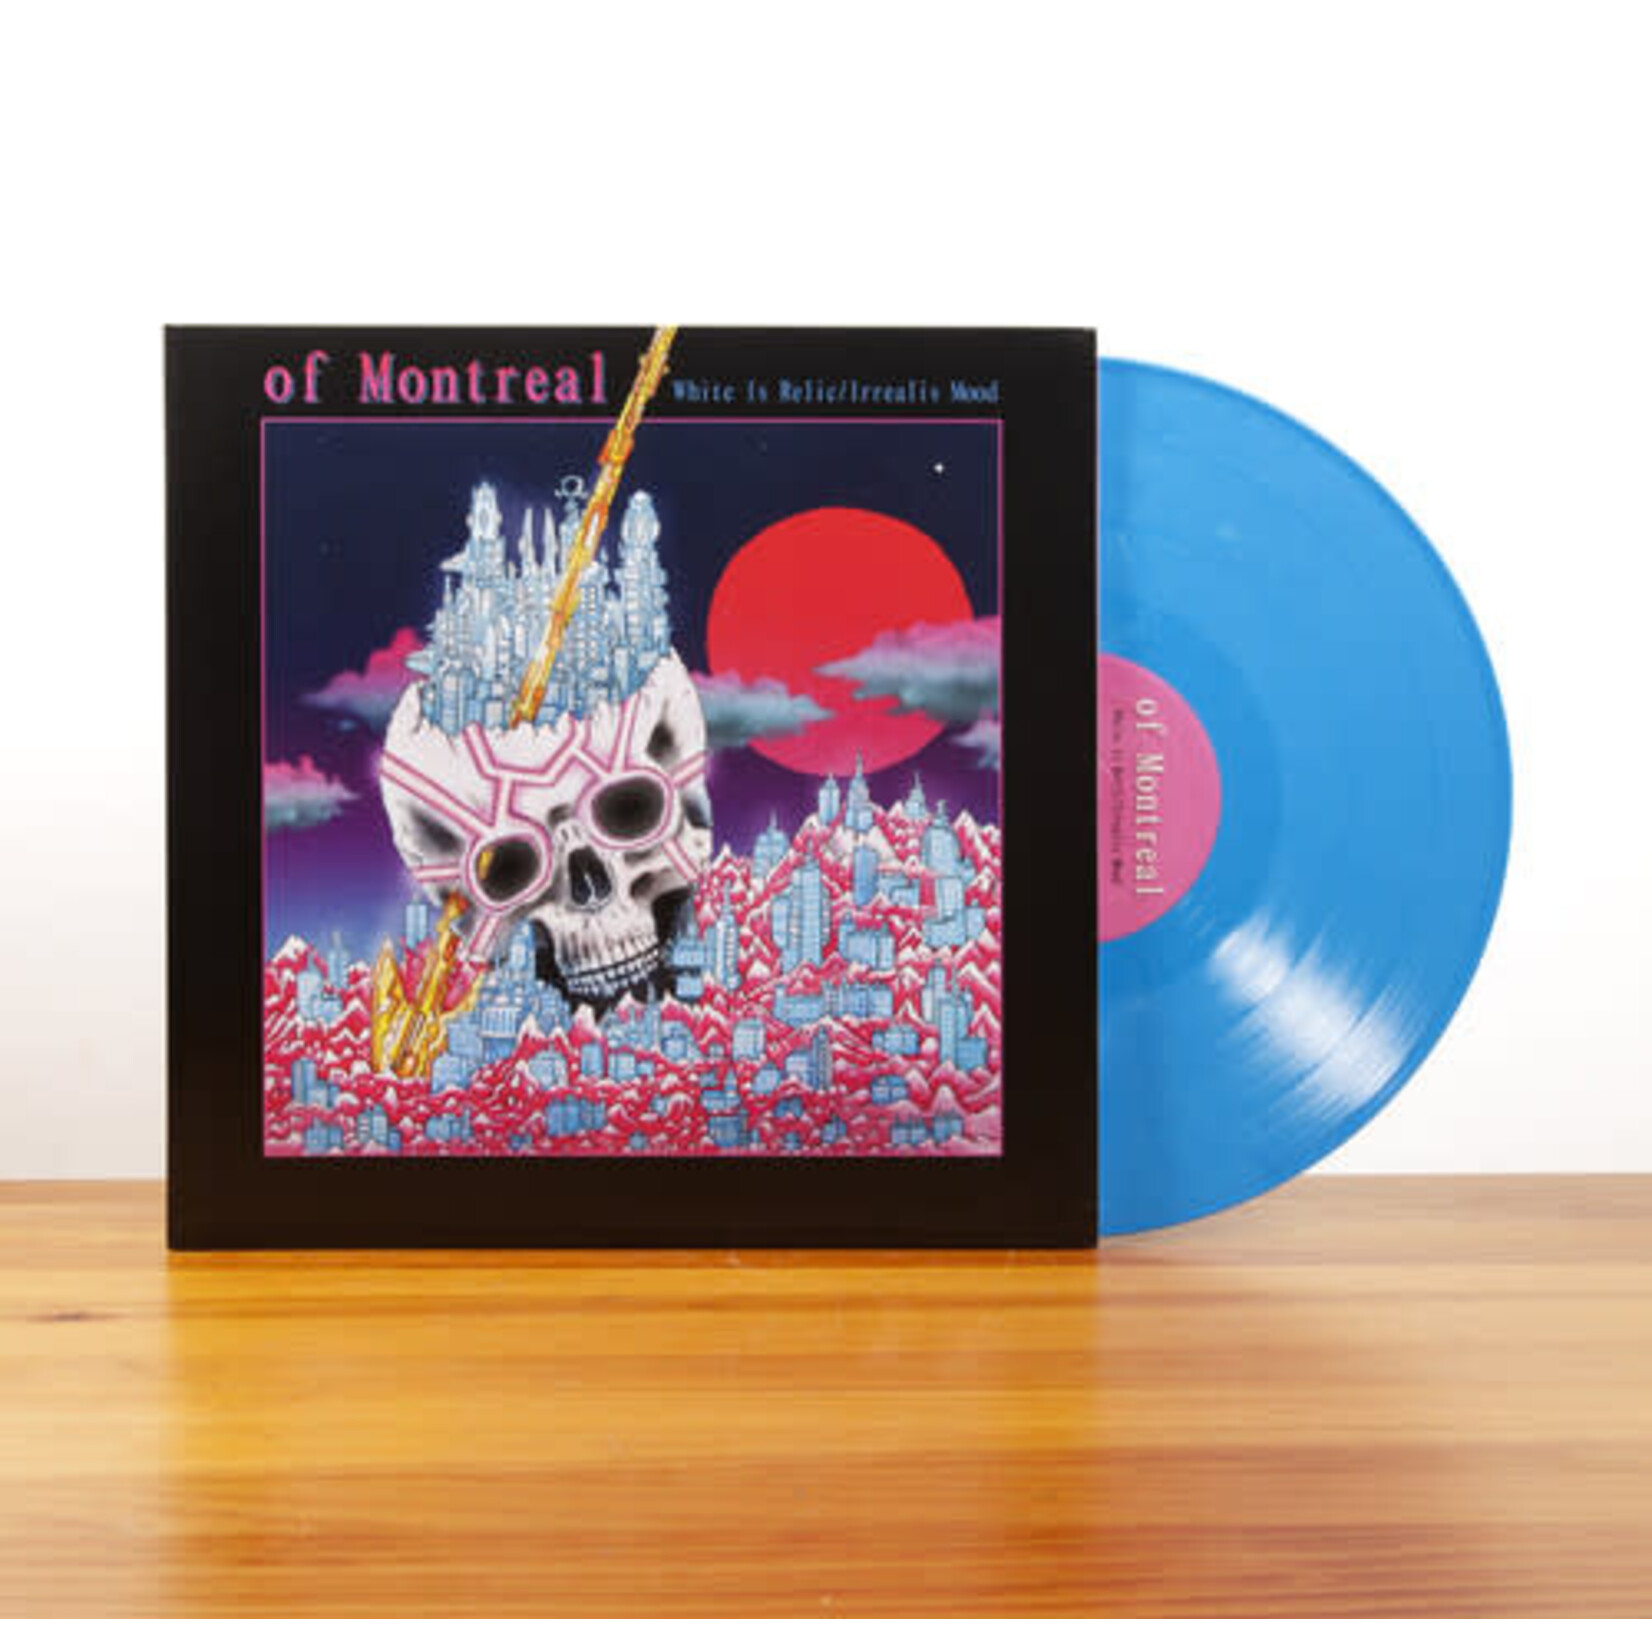 Polyvinyl Of Montreal - White Is Relic/Irrealis Mood (LP) [Blue]